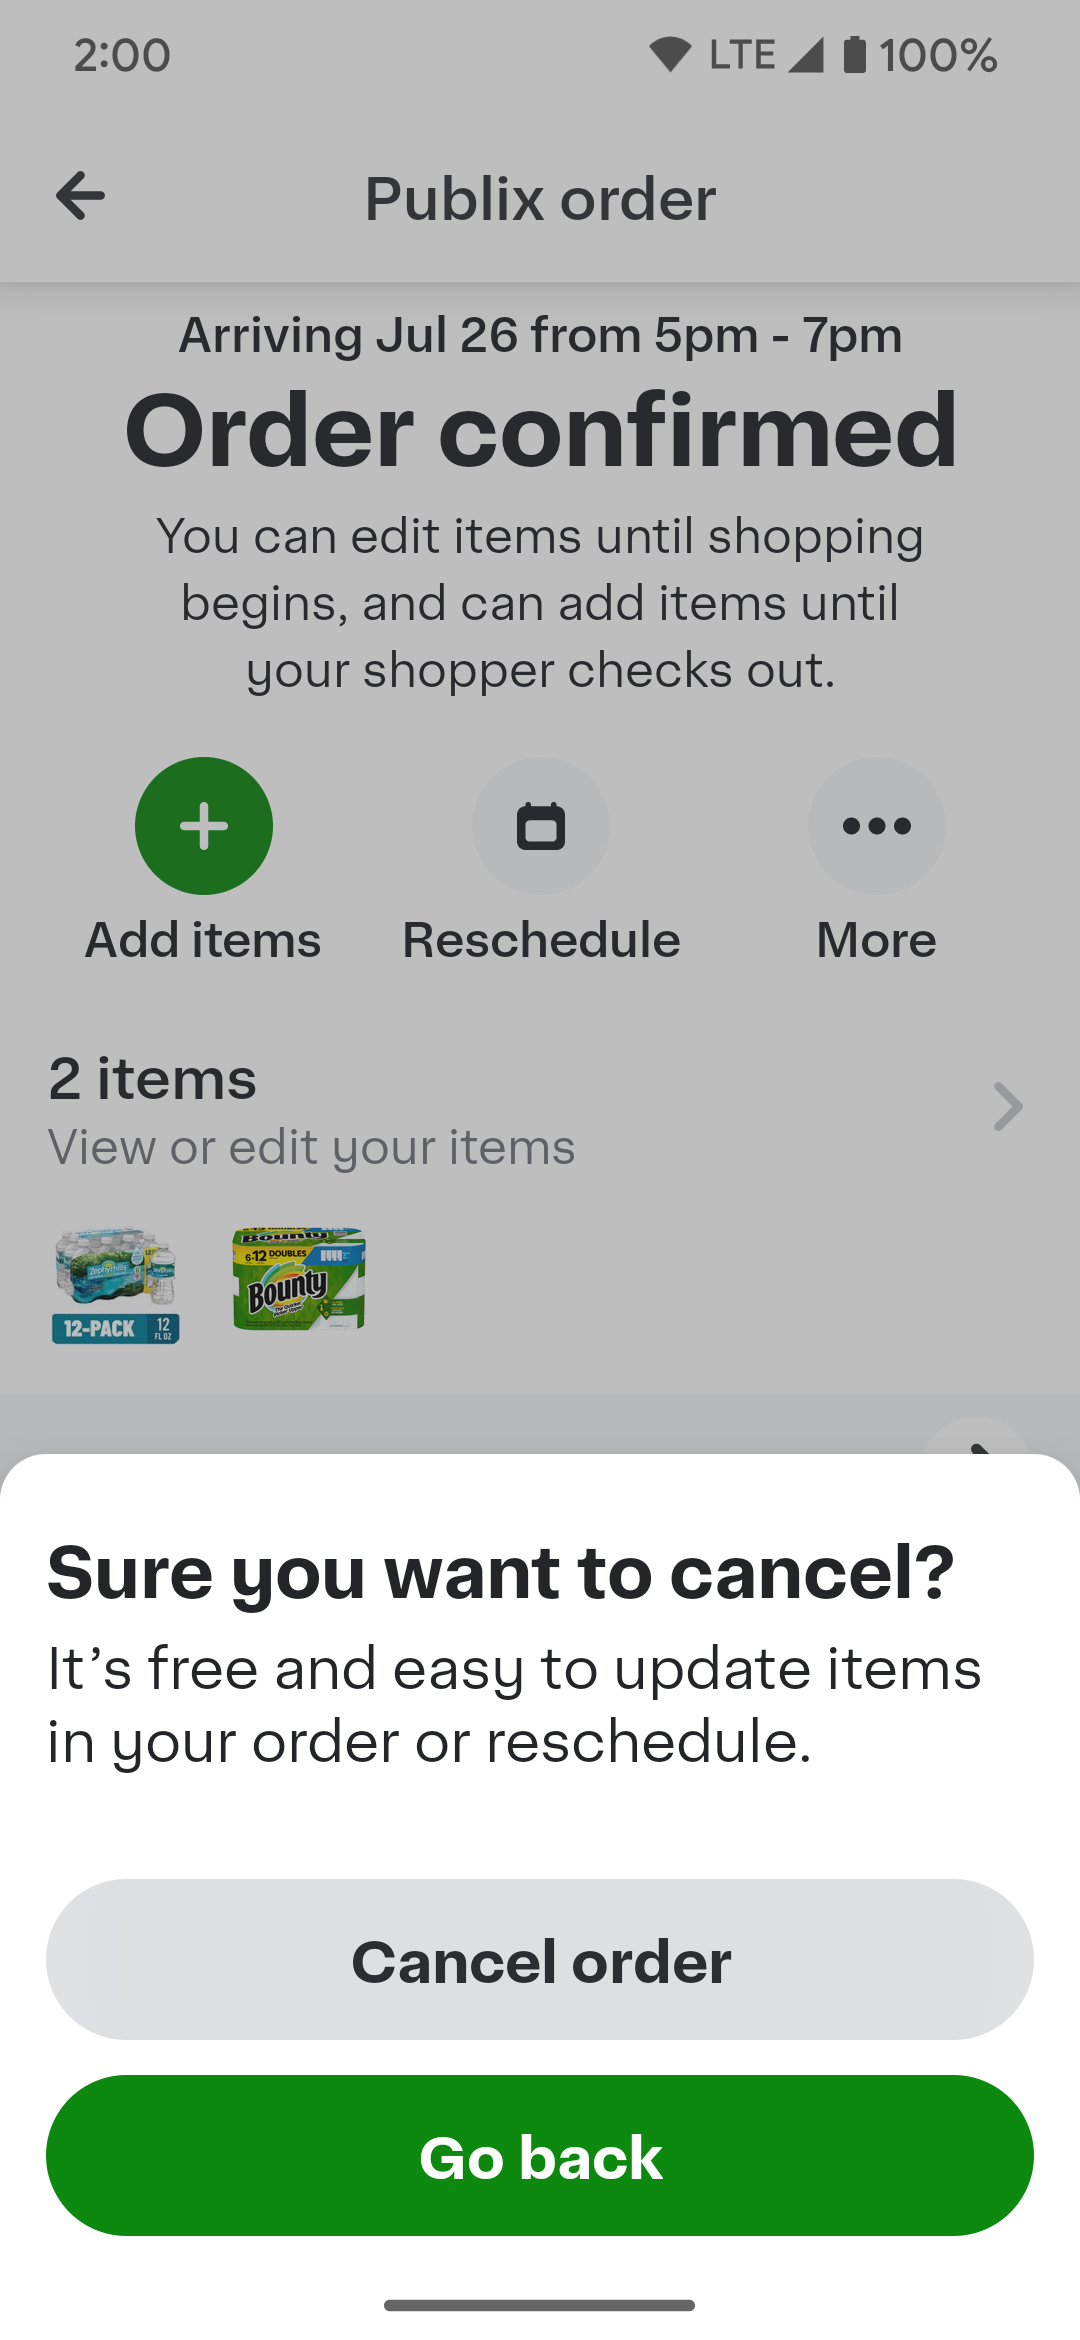 Confirming the order cancellation by pressing the Cancel order button in the Instacart app.